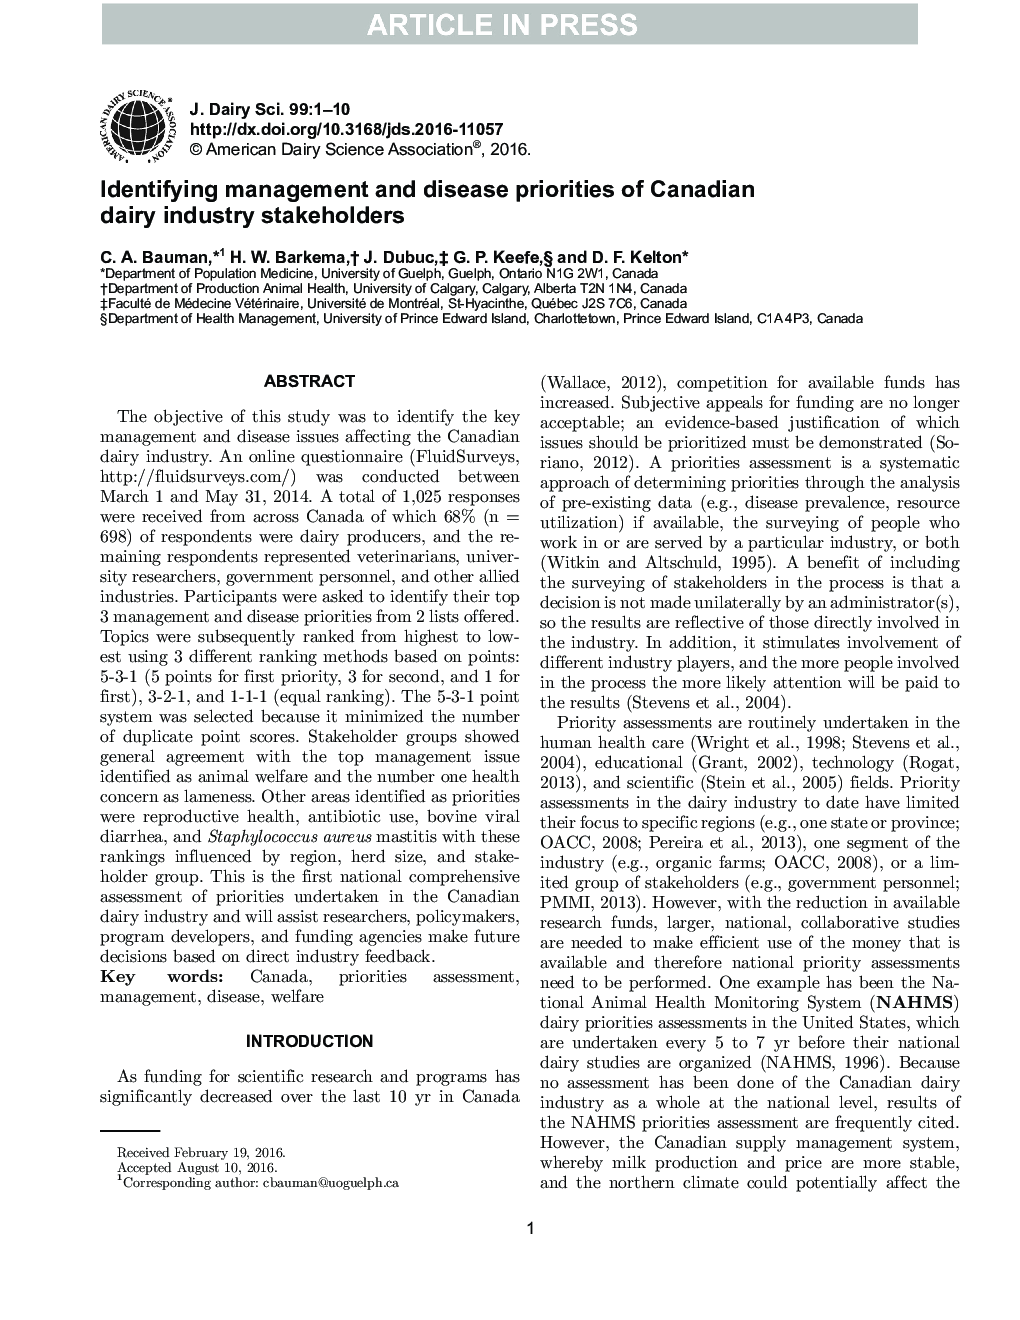 Identifying management and disease priorities of Canadian dairy industry stakeholders